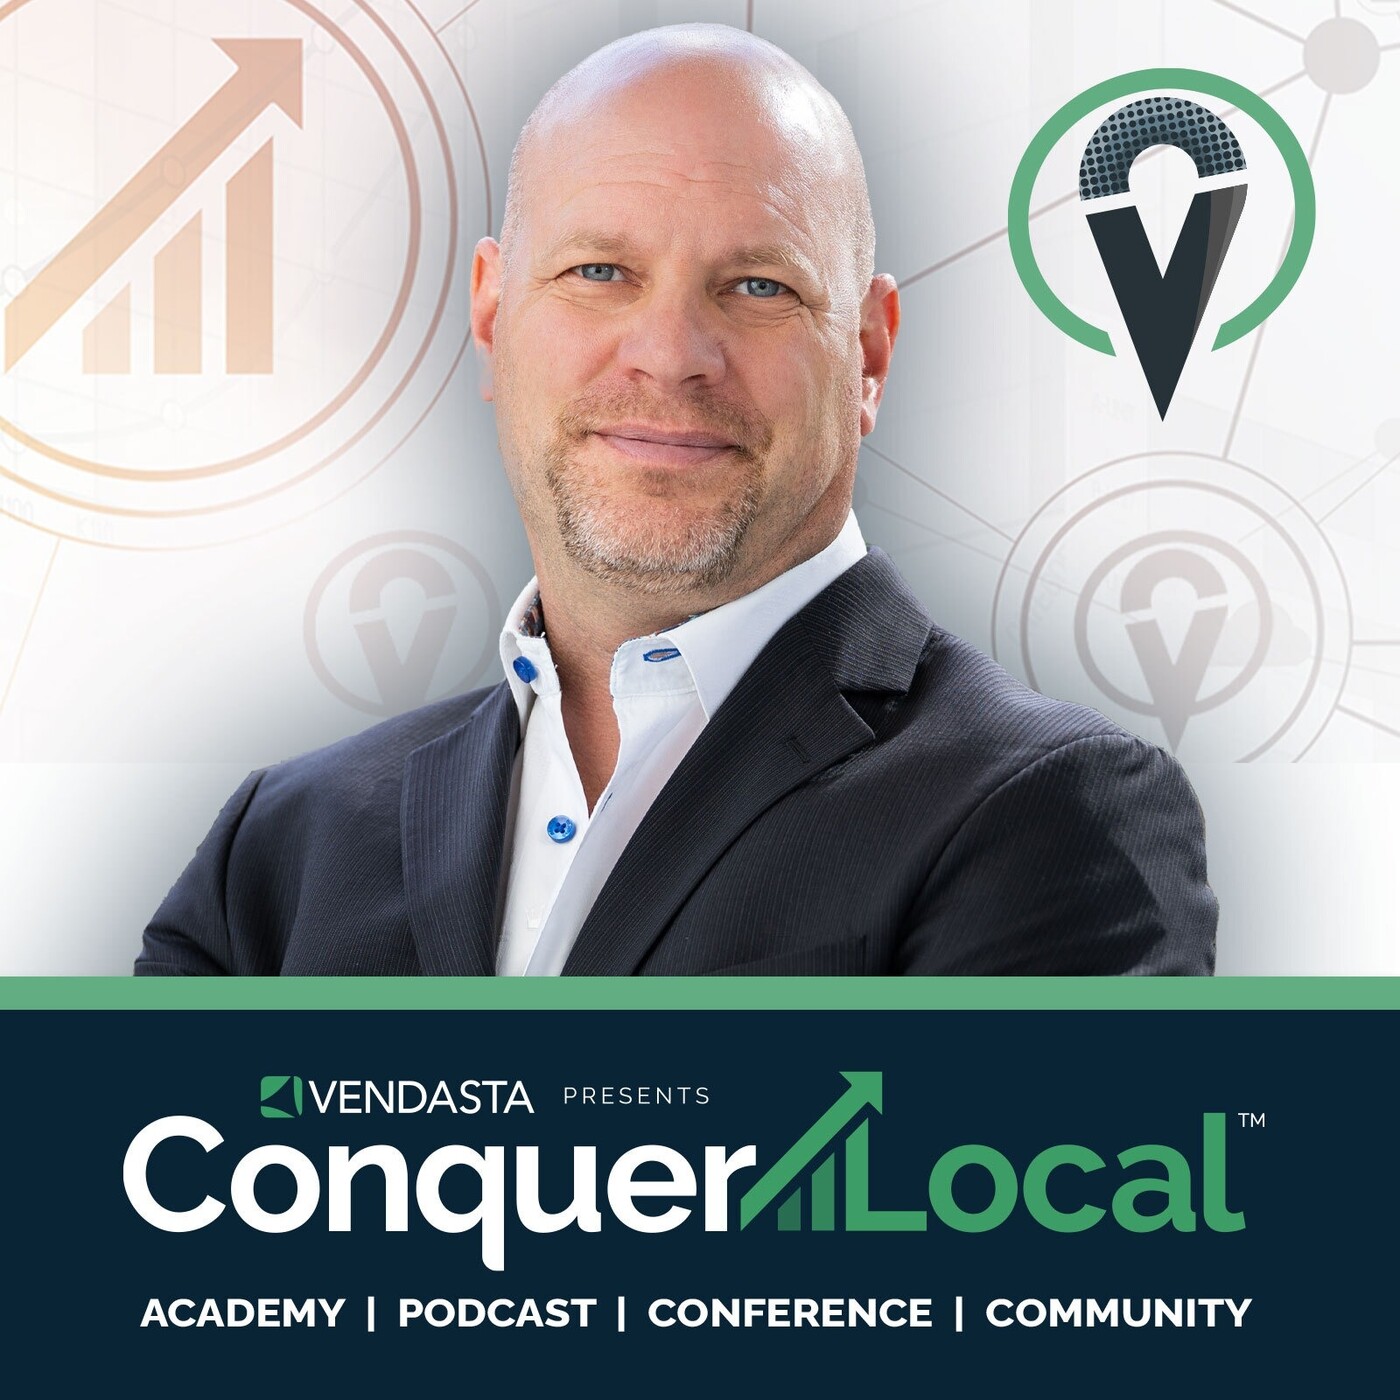 podcast Conquer Local with George Leith